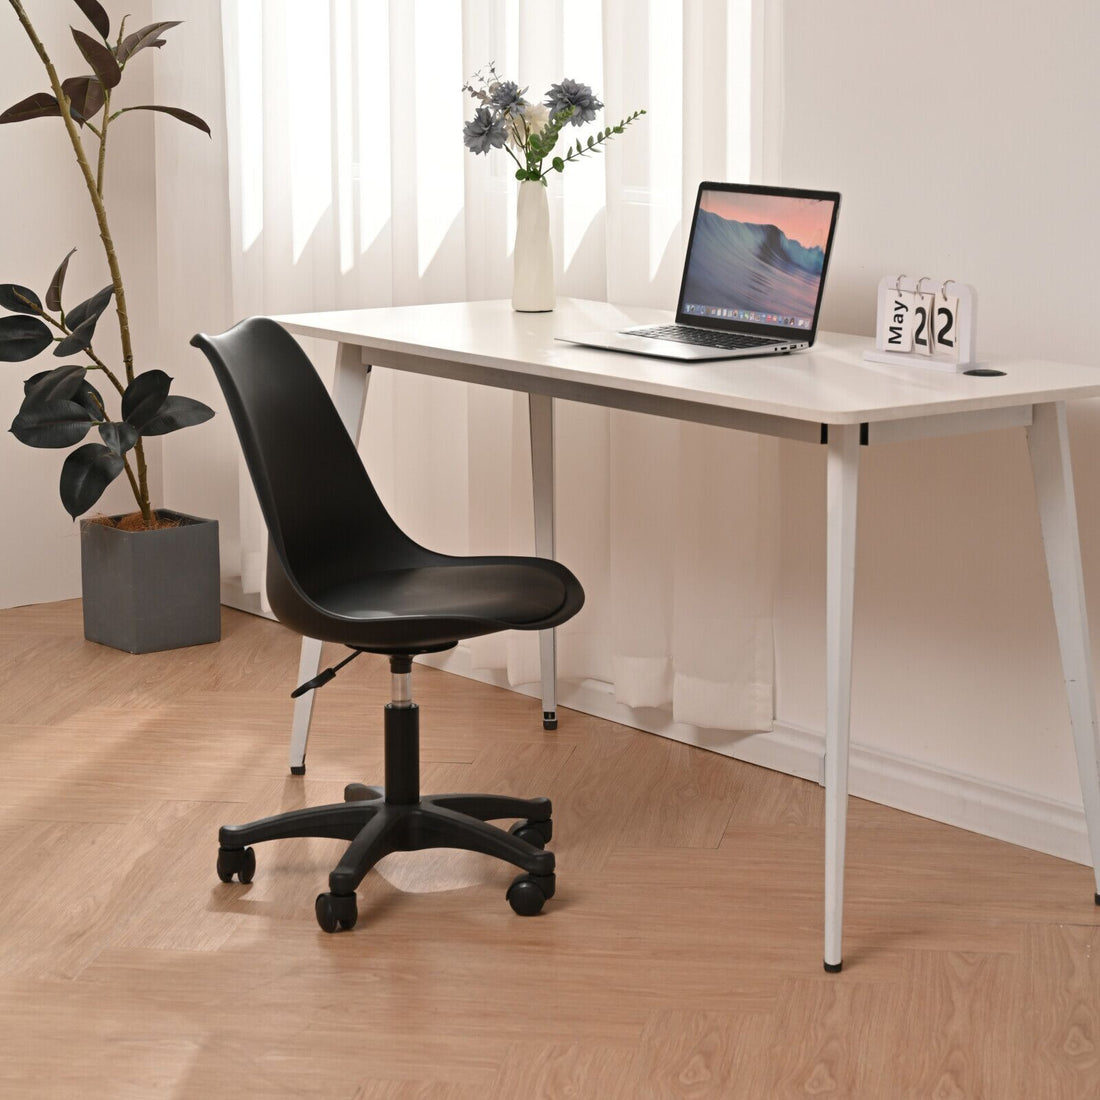 Black Pp With Wheels Adjustable Height Office